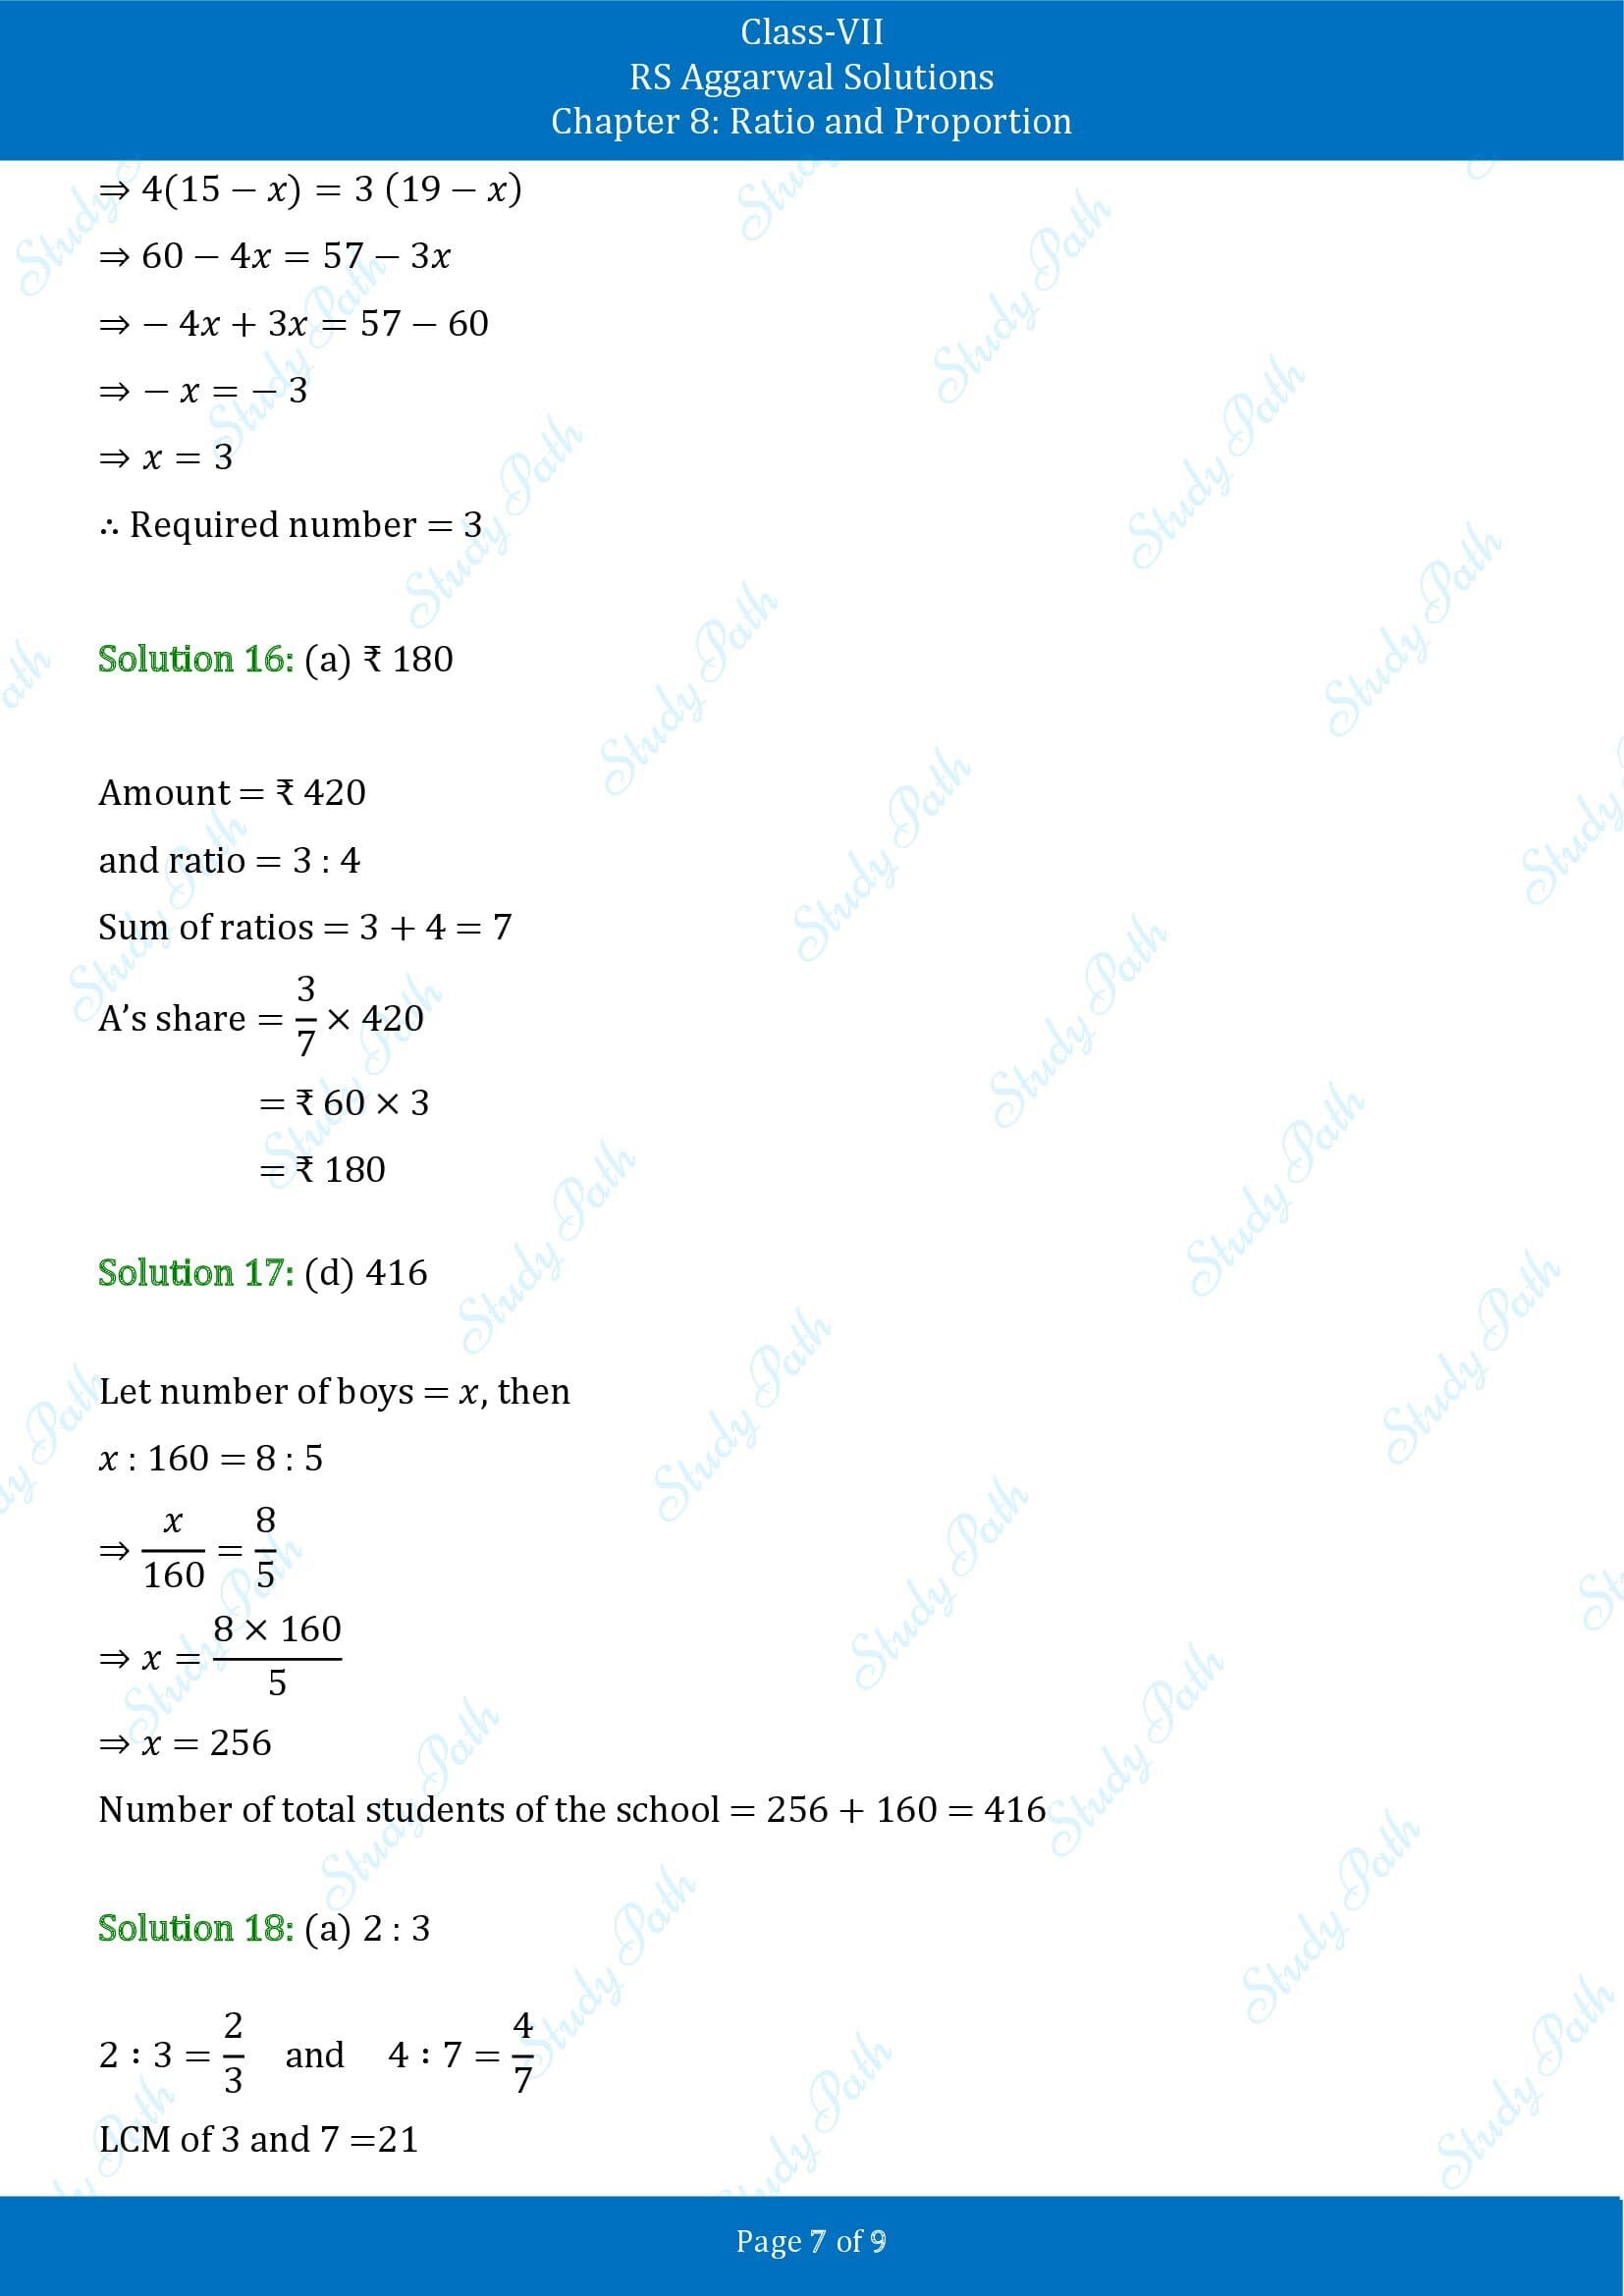 RS Aggarwal Solutions Class 7 Chapter 8 Ratio and Proportion Exercise 8CMCQ 00007